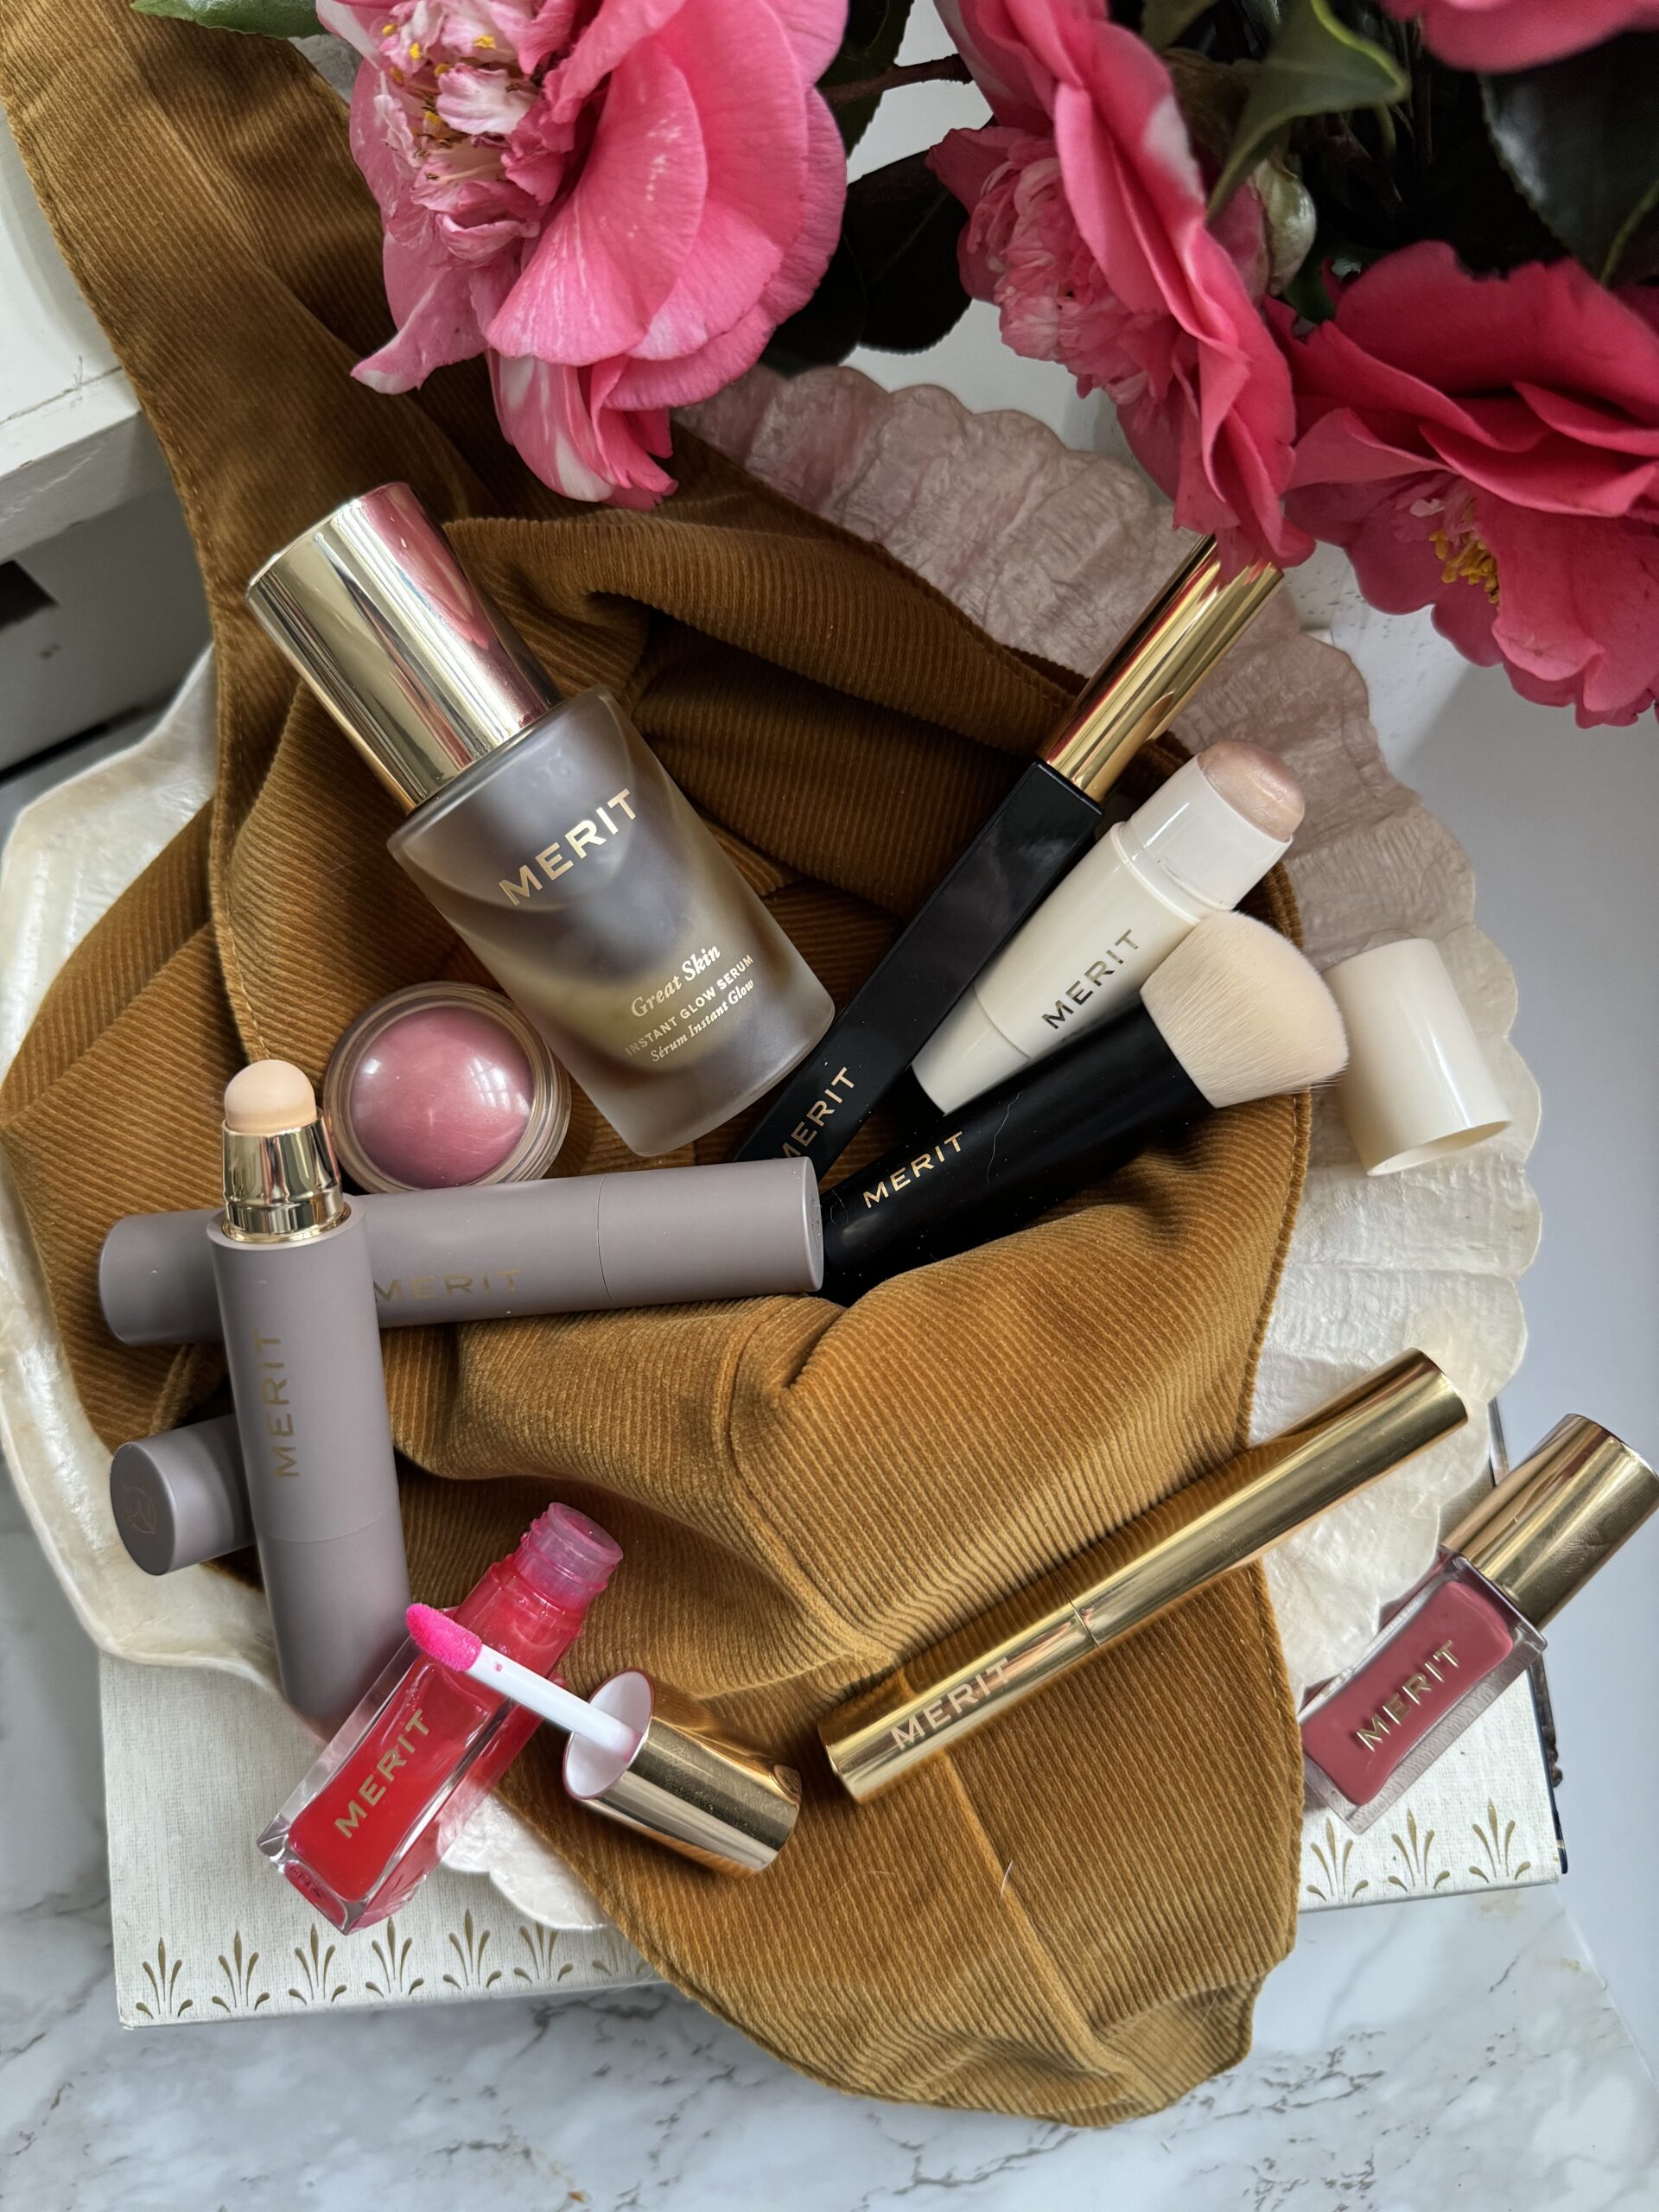 Assorted cosmetic products arranged on a draped earth-toned fabric with pink flowers nearby.